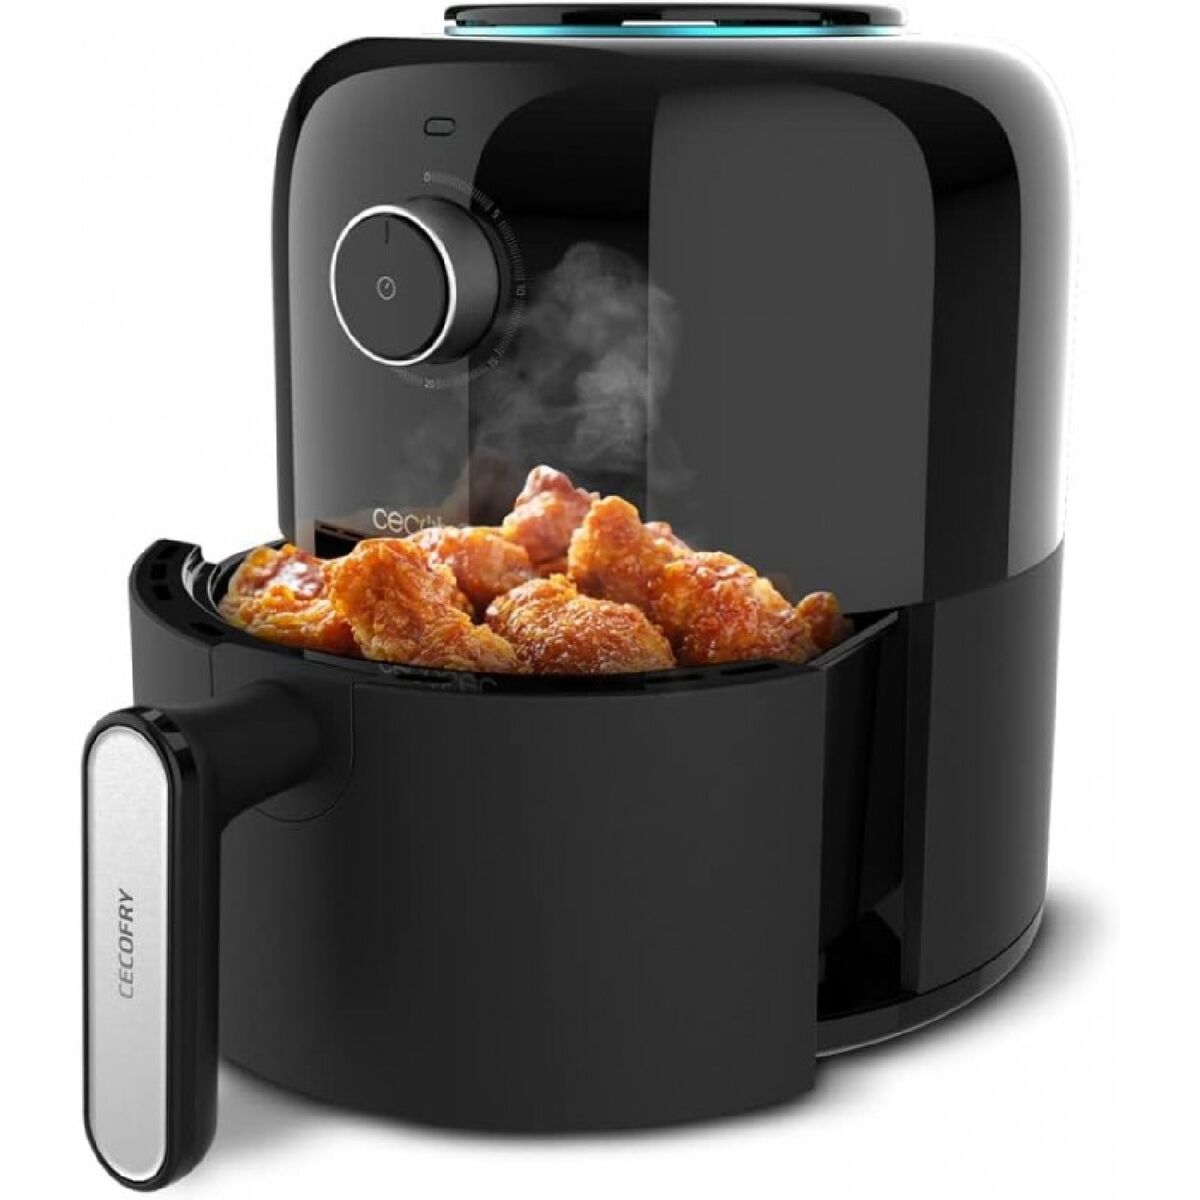 Luchtfriteuse Cecotec Cecofry Pixel 2500 1200 W 2,5 L